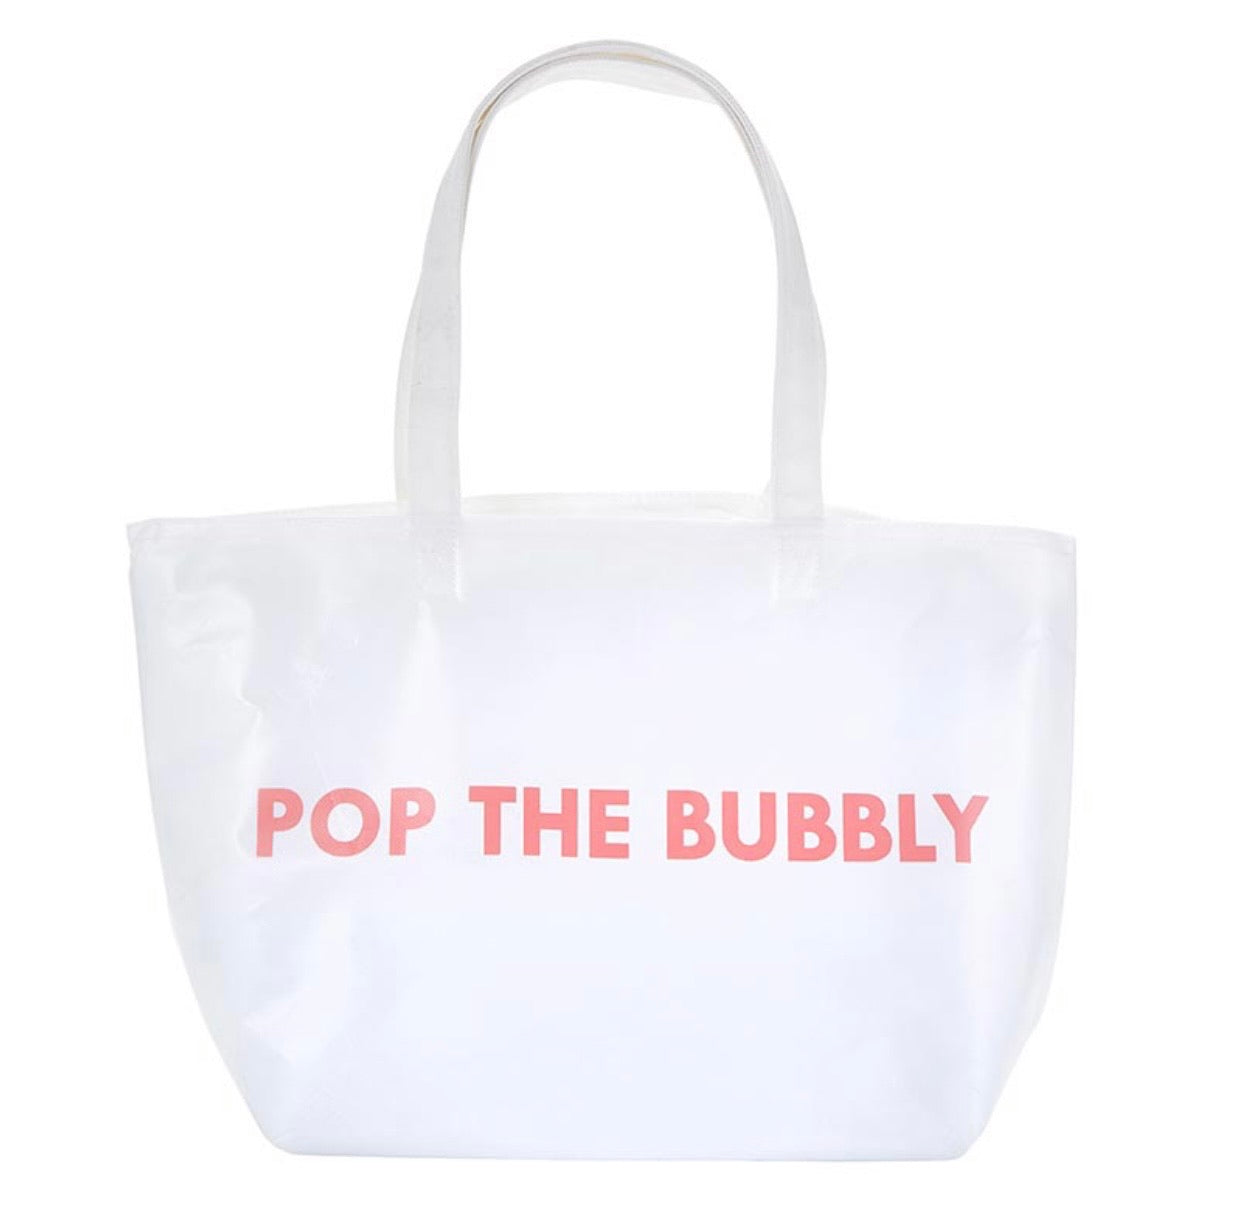 Pop The Bubbly - insulated tote